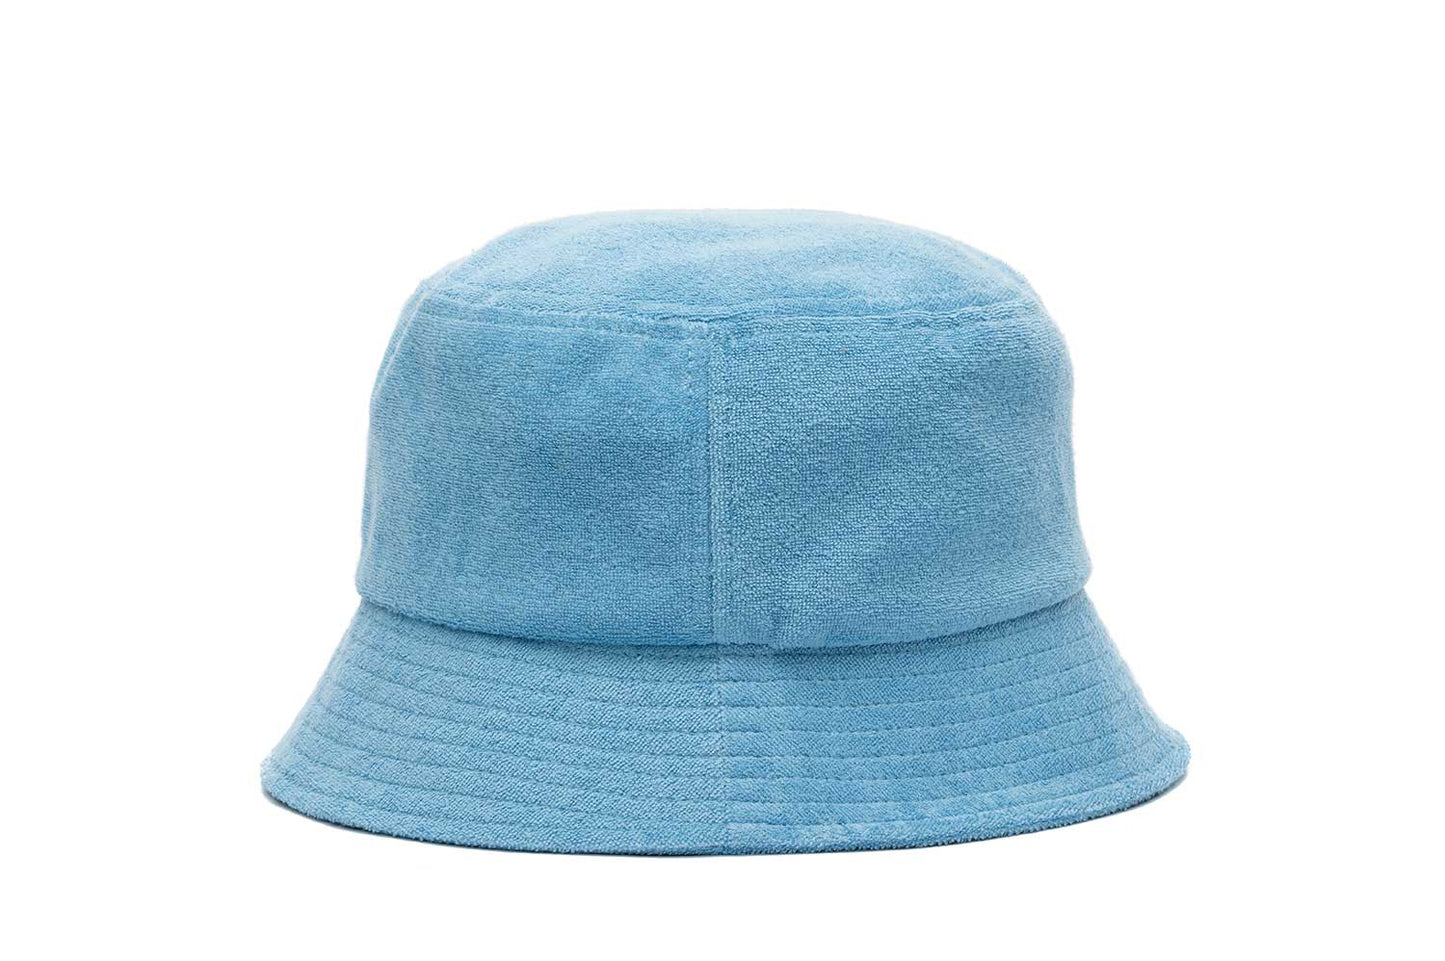 SeaVees - Terry Bucket Hat - Pacific Blue